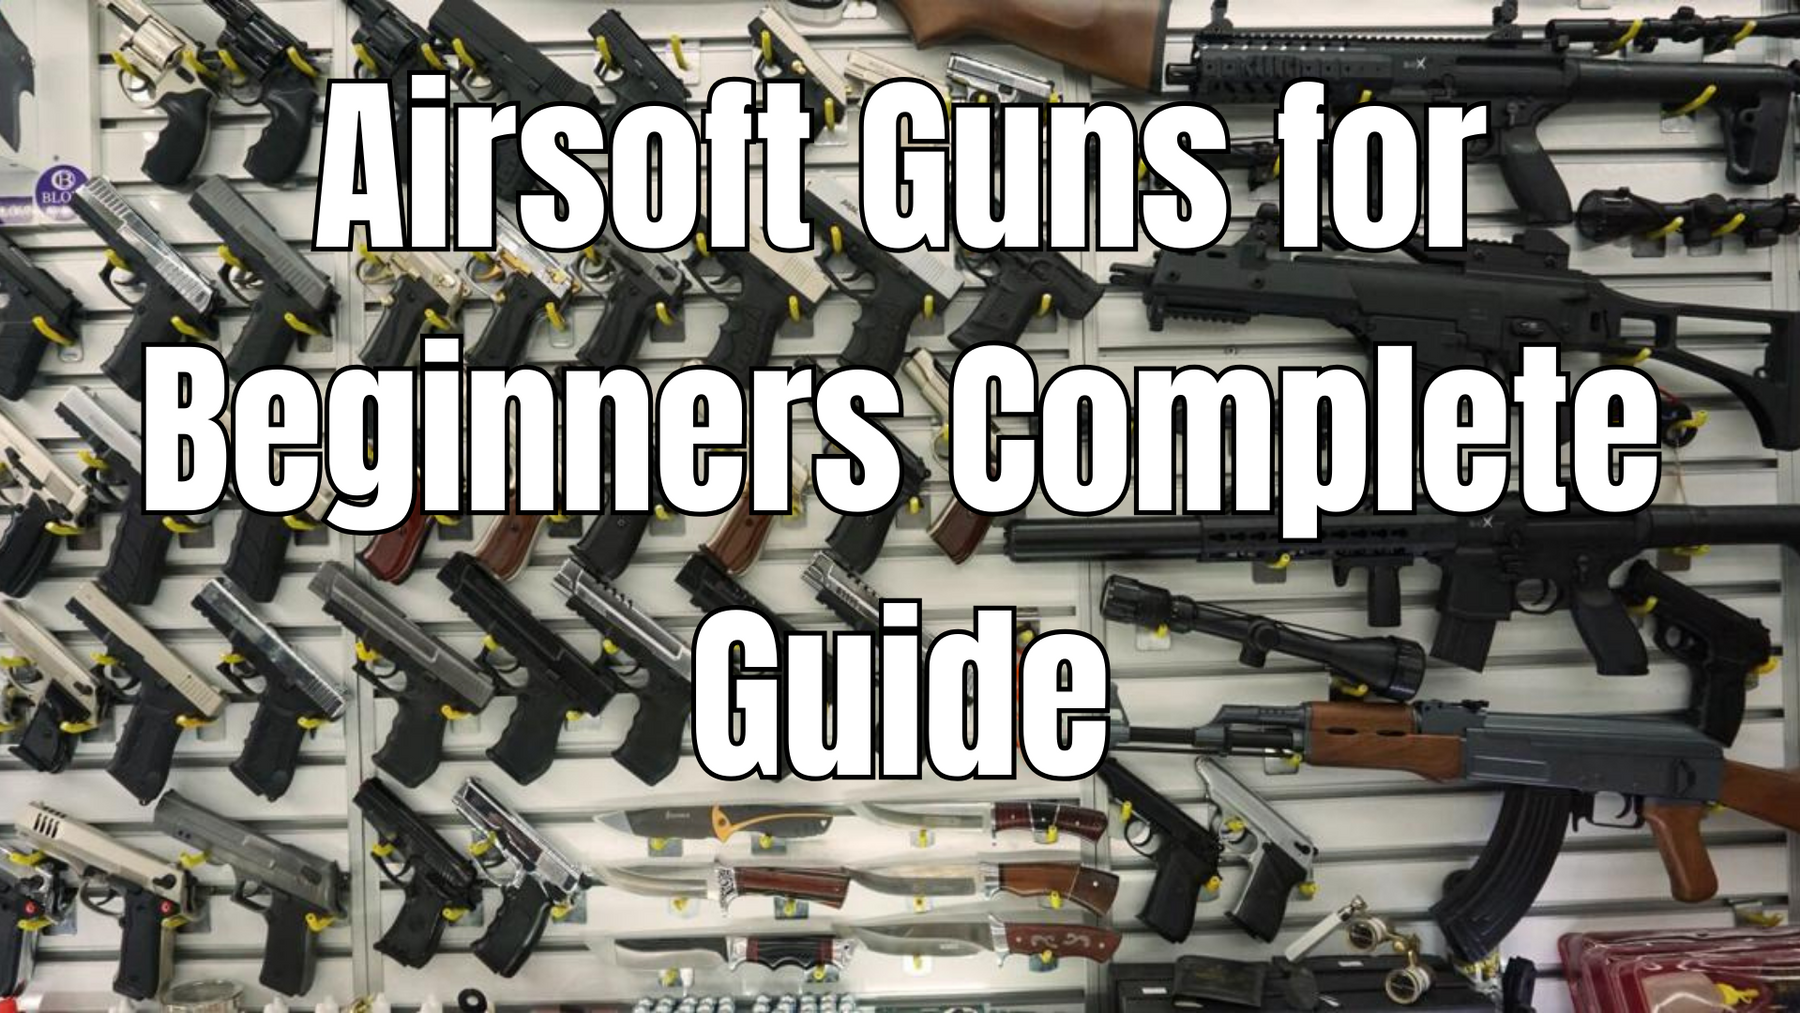 Best Airsoft Guns for Beginners Complete Guide